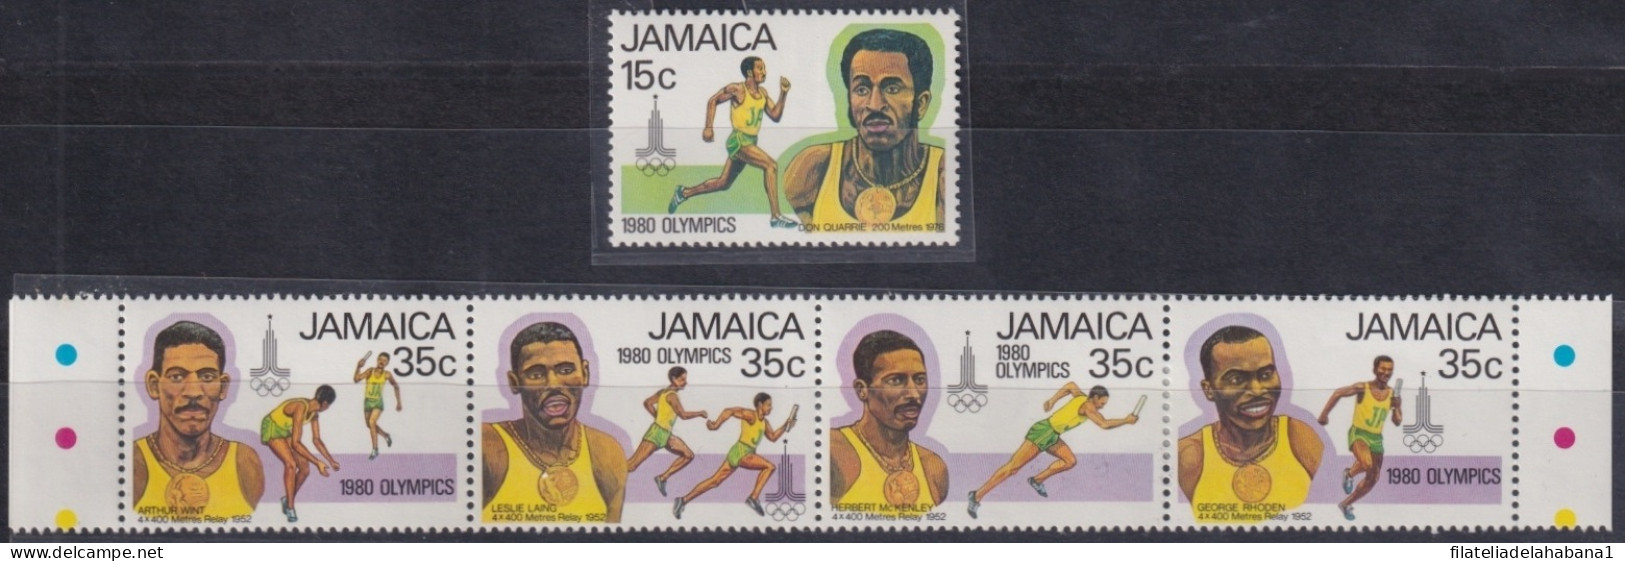 F-EX50105 JAMAICA MNH 1980 MOSCOW OLYMPIC GAMES ATHLETICS ATLETISMO.                      - Sommer 1980: Moskau